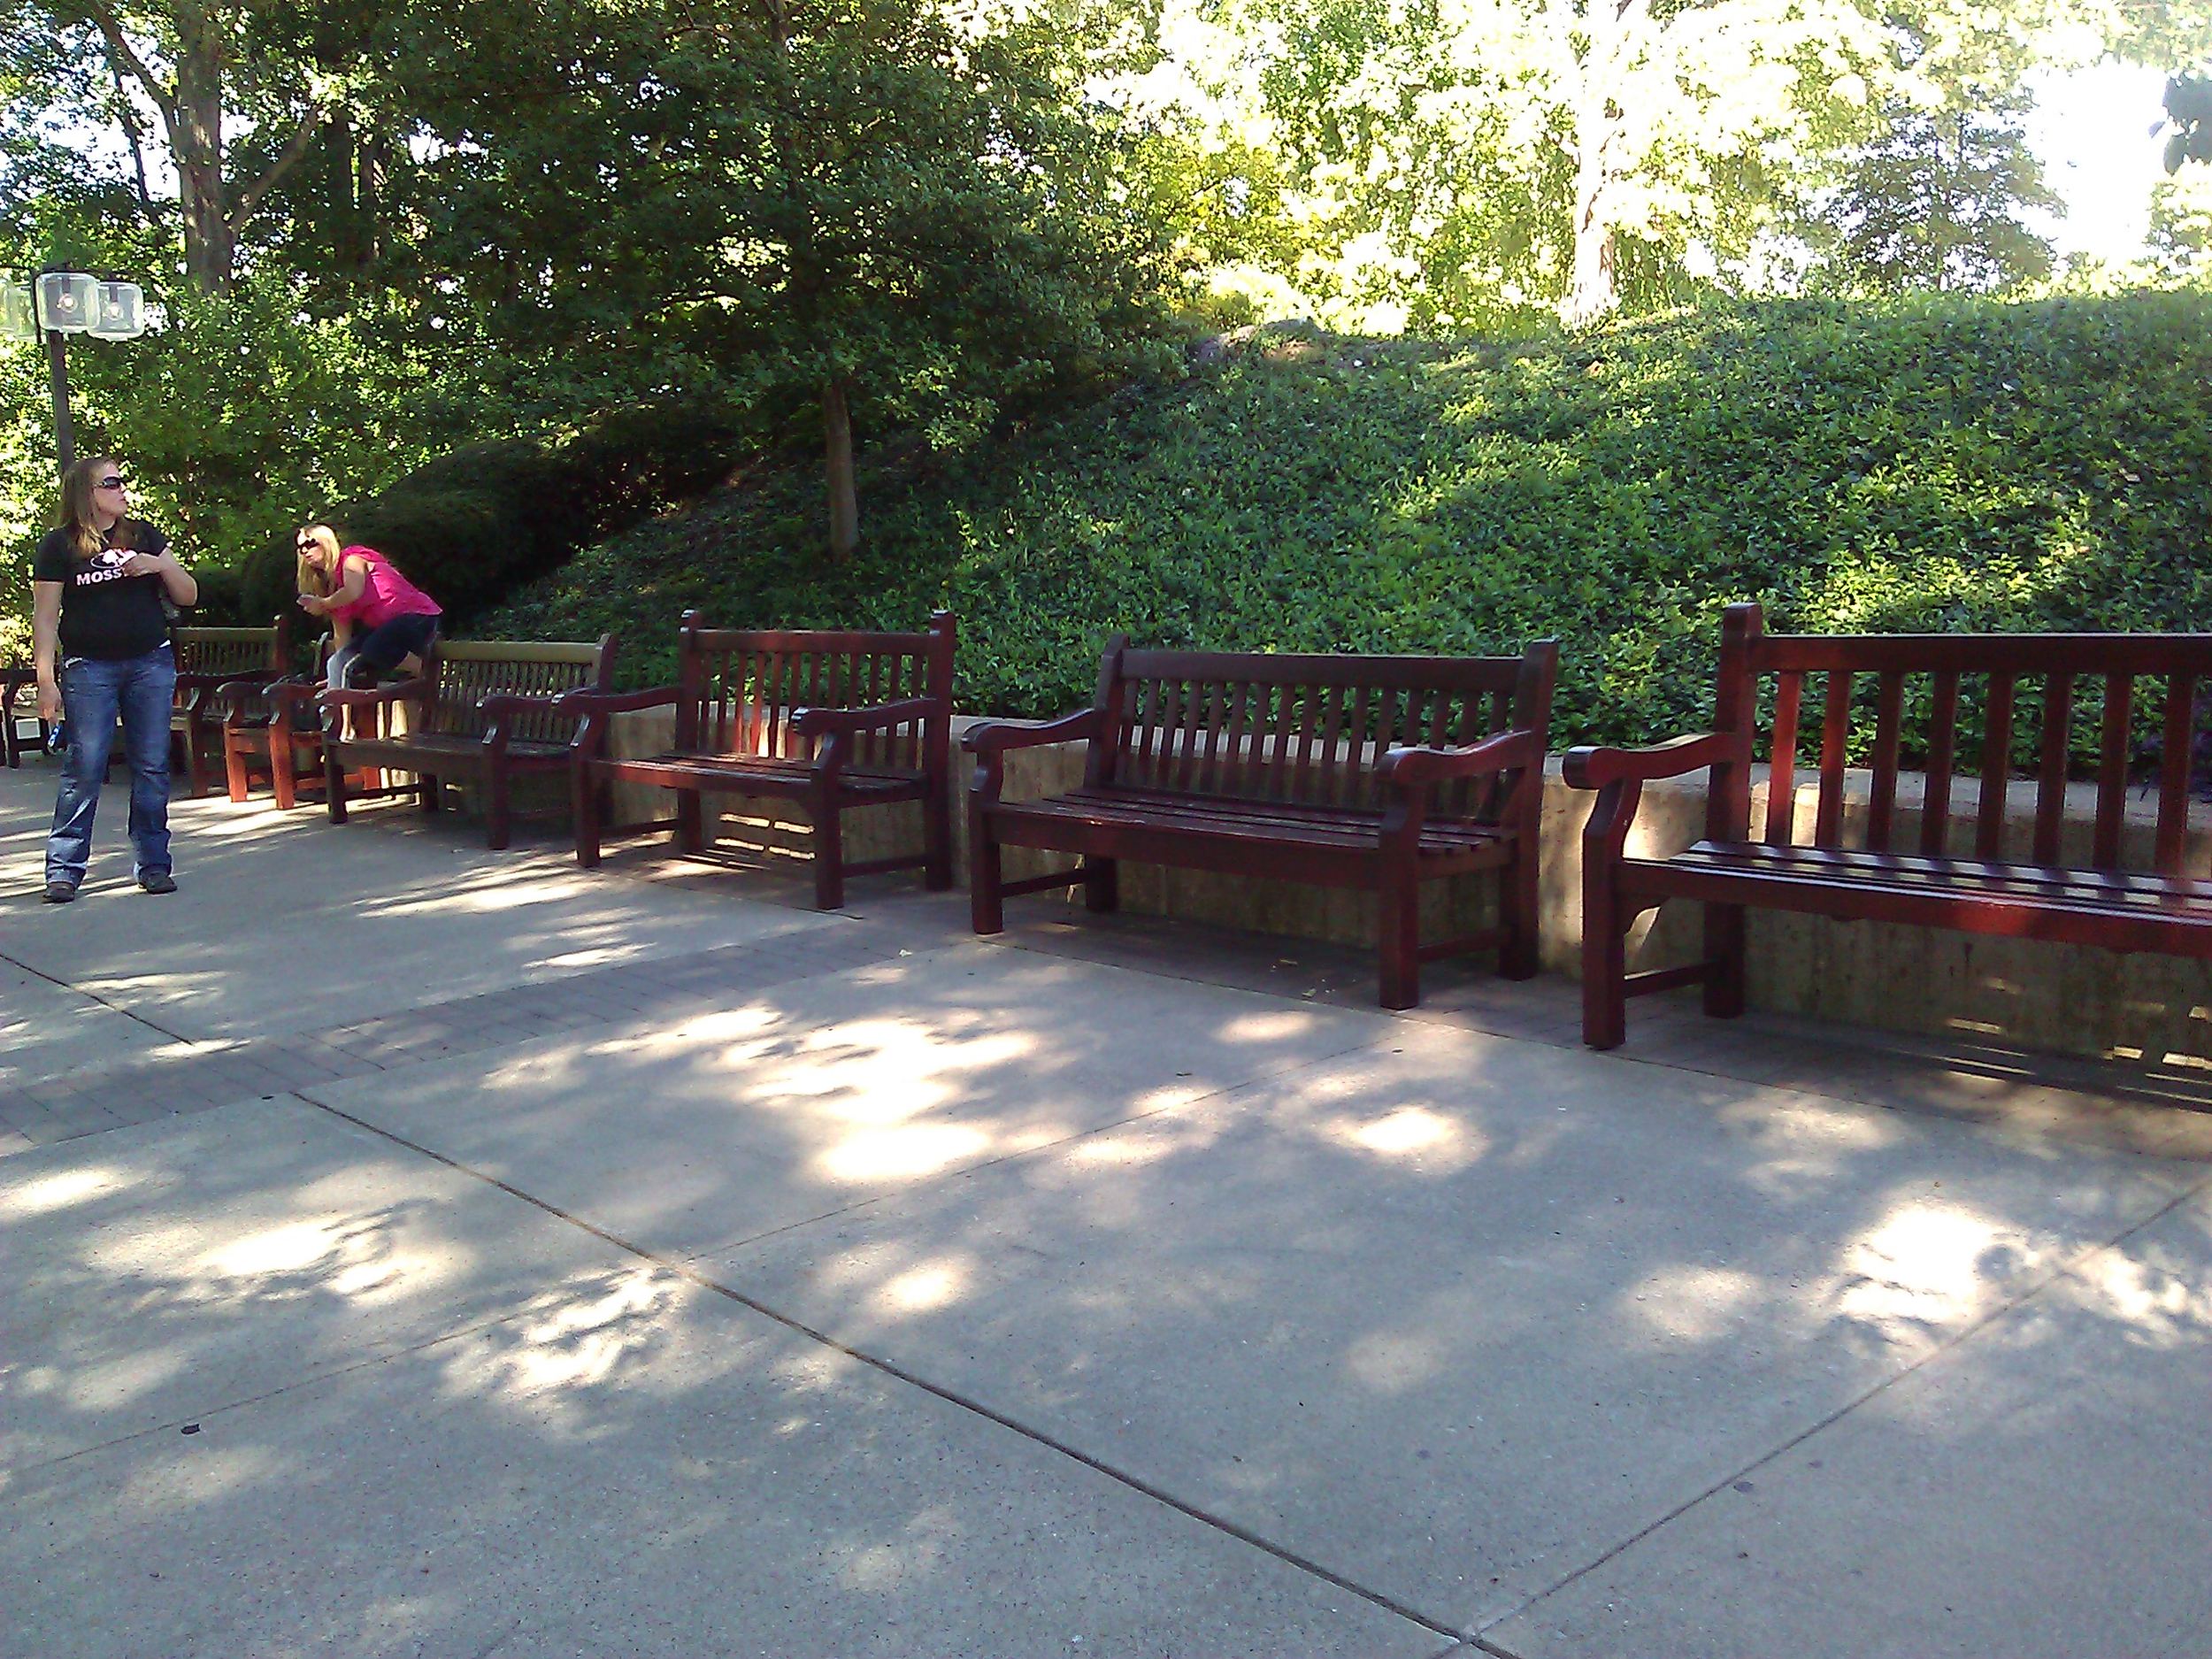 Copious benches abound outside, another example of the kindness and folksiness.